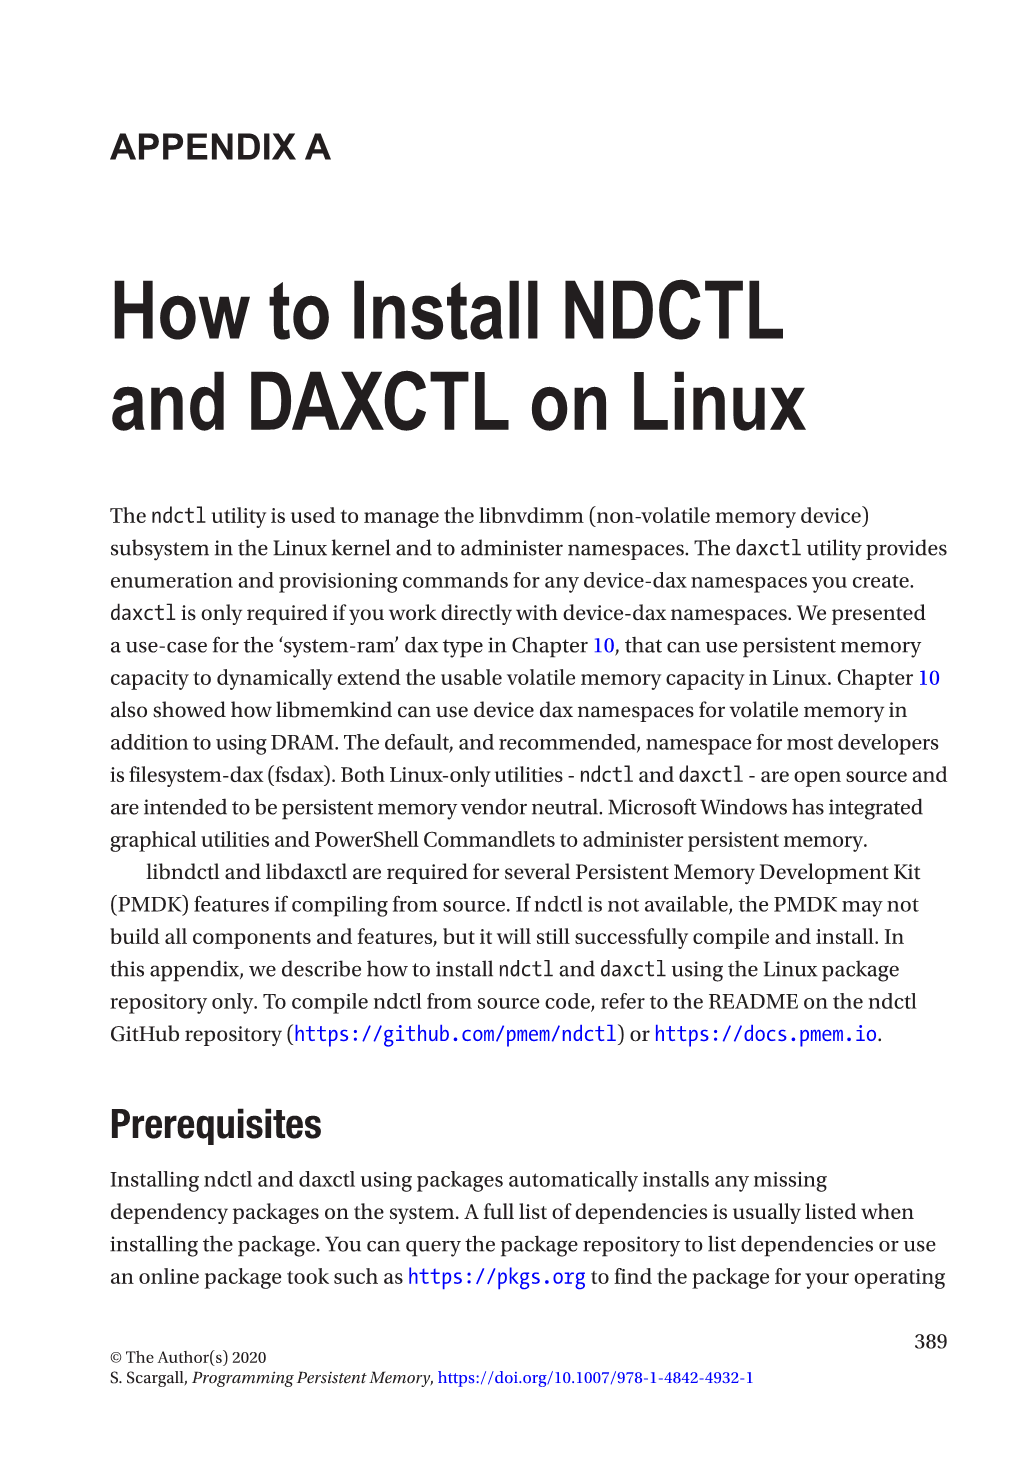 How to Install NDCTL and DAXCTL on Linux